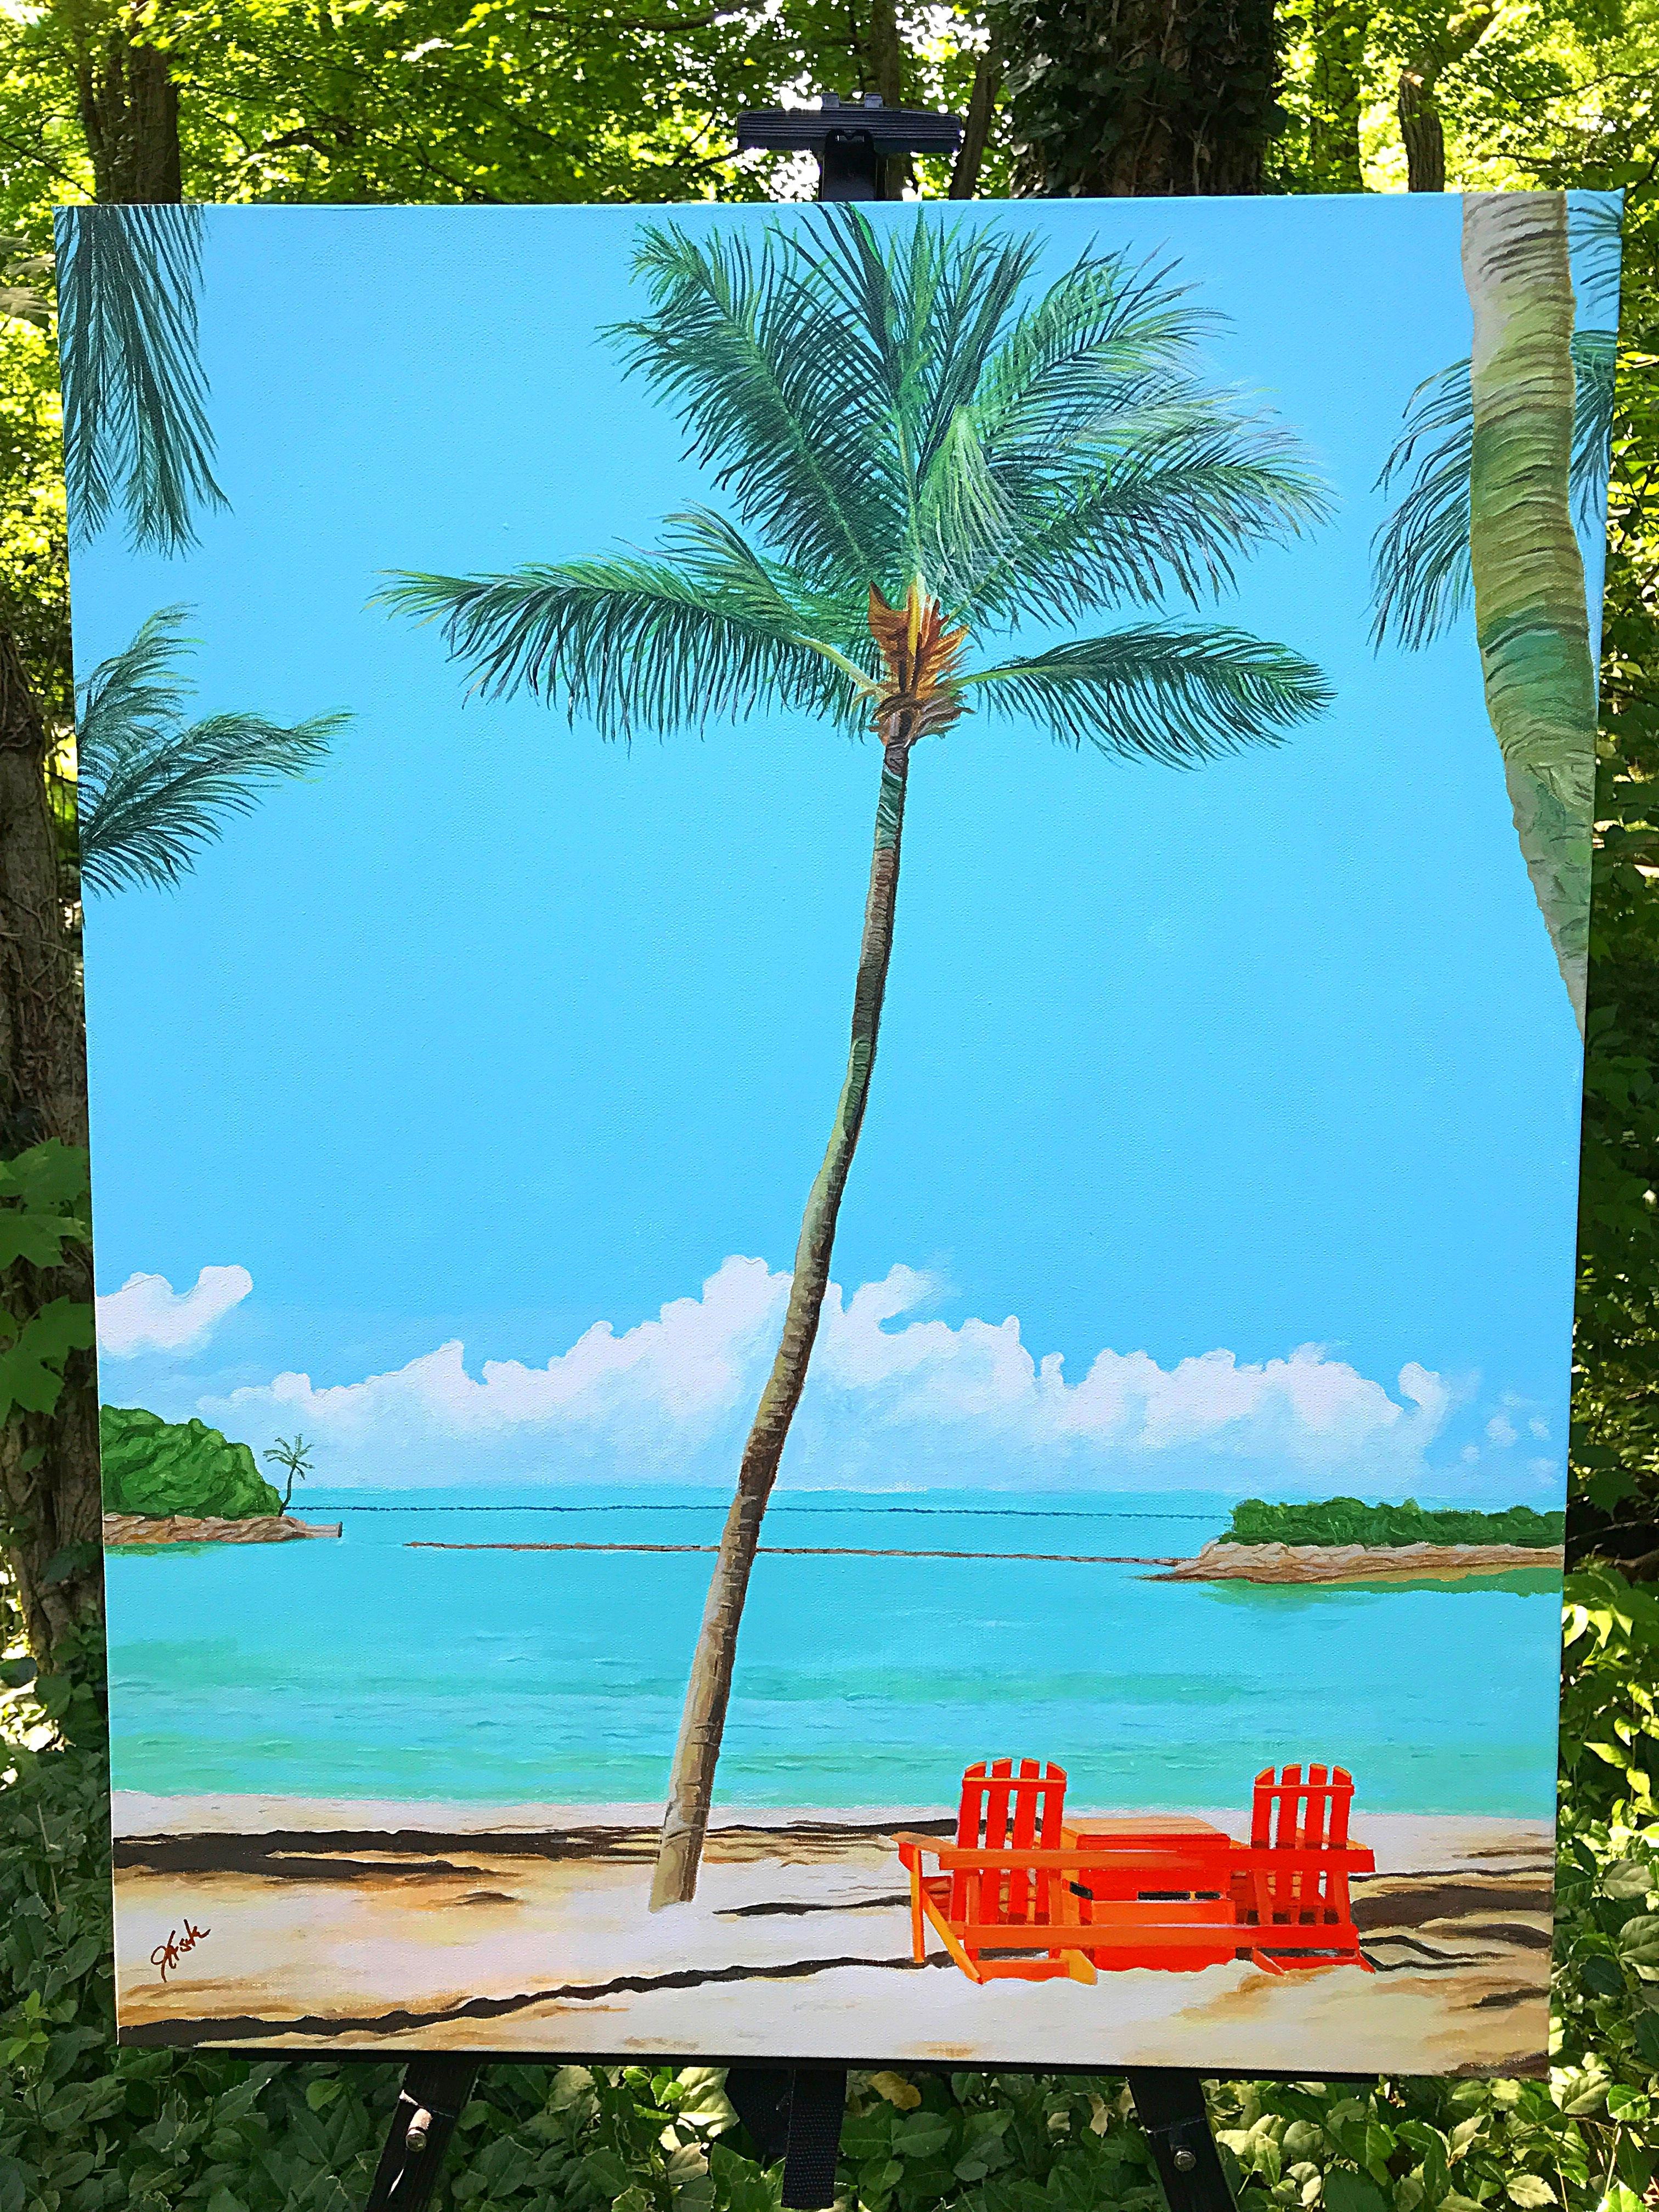 <p>Artist Comments<br>Artist John Jaster shares a relaxing summer scene of blue skies over a turquoise sea lapping onto a white sandy beach. Two empty red chairs await to be filled. A tall palm tree hovers like a natural umbrella casting deep